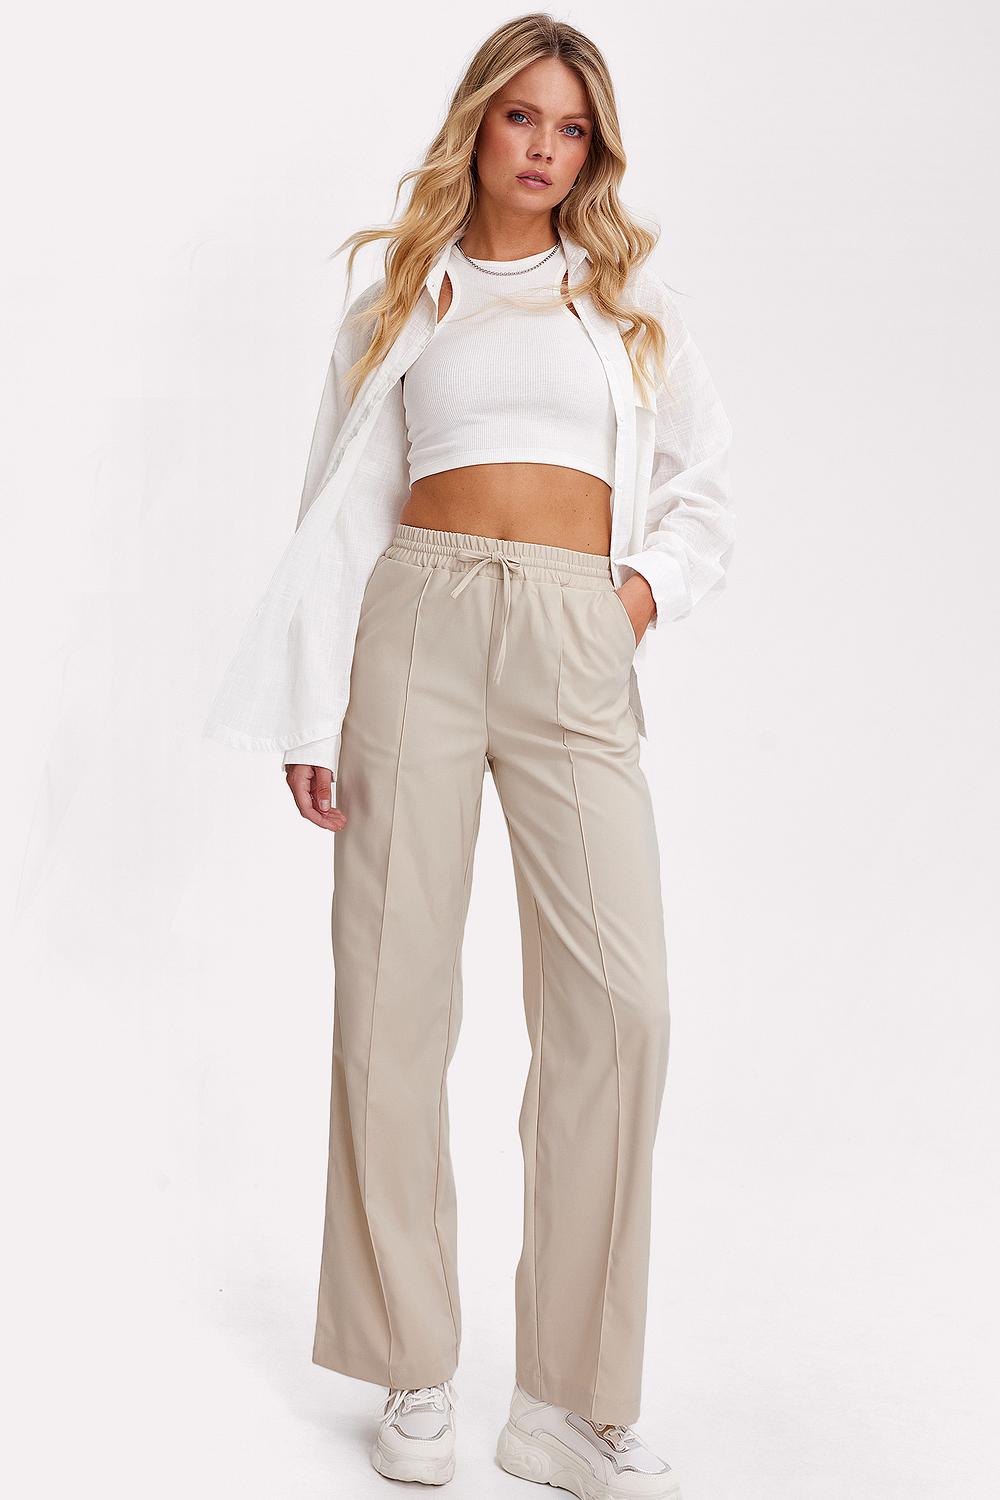 Sand trousers